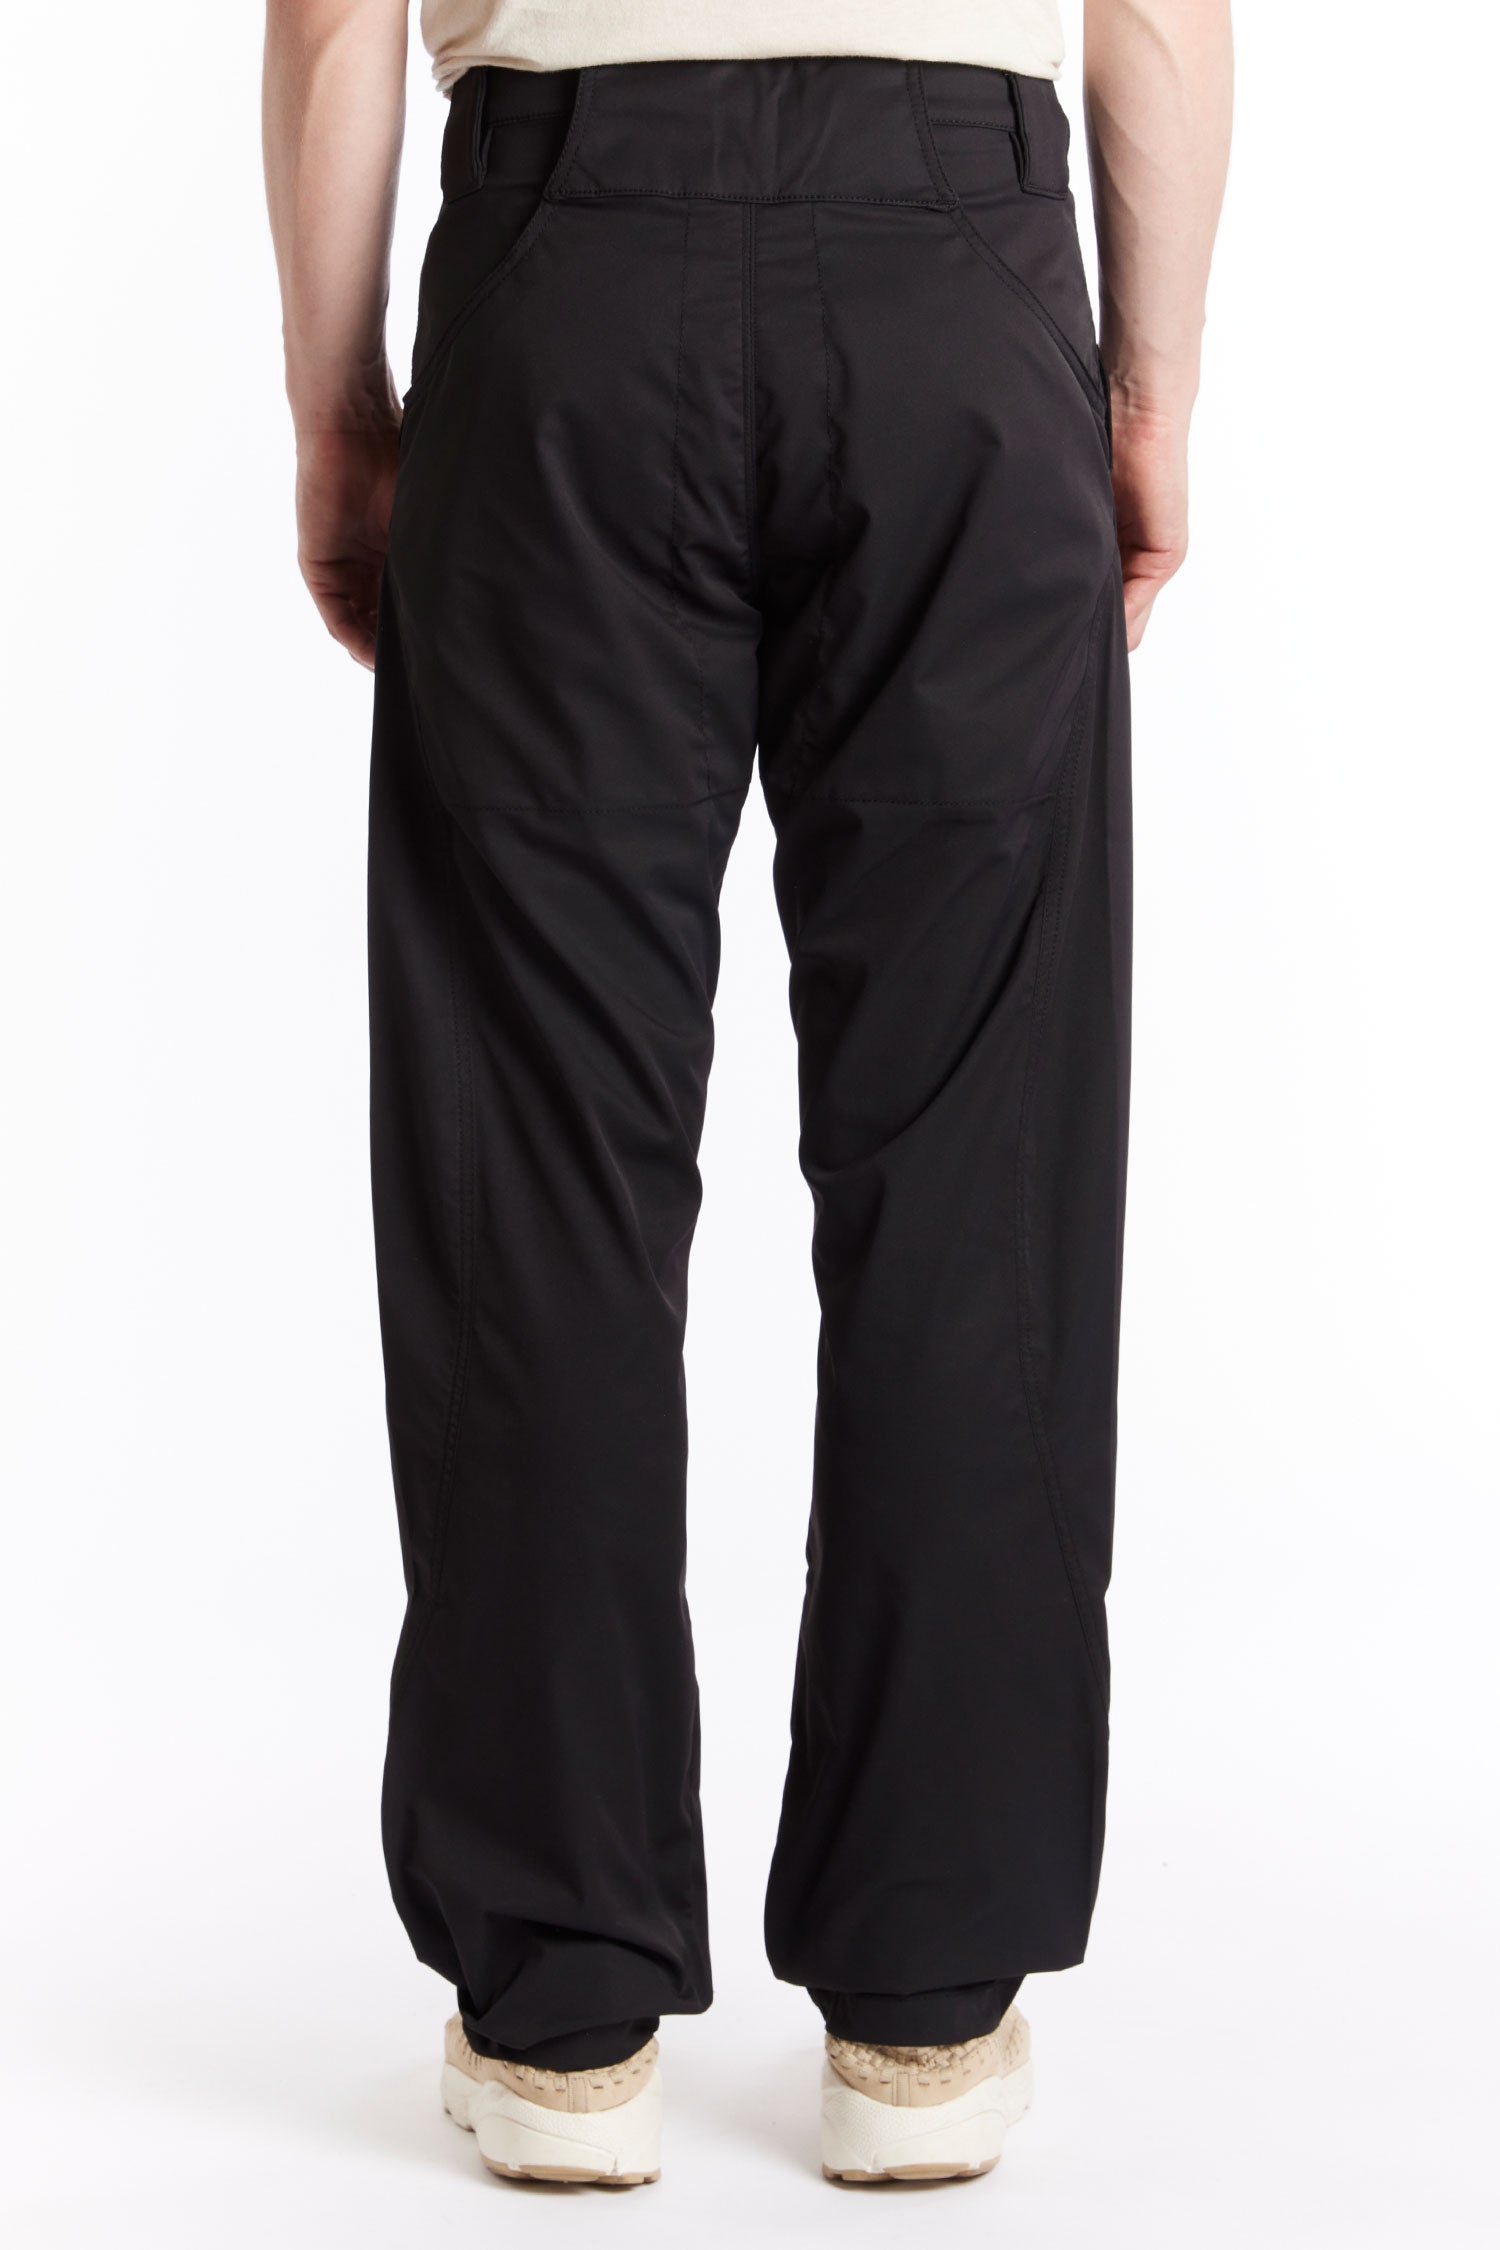 The AFFXWRKS - CURVED PANT BLACK  available online with global shipping, and in PAM Stores Melbourne and Sydney.